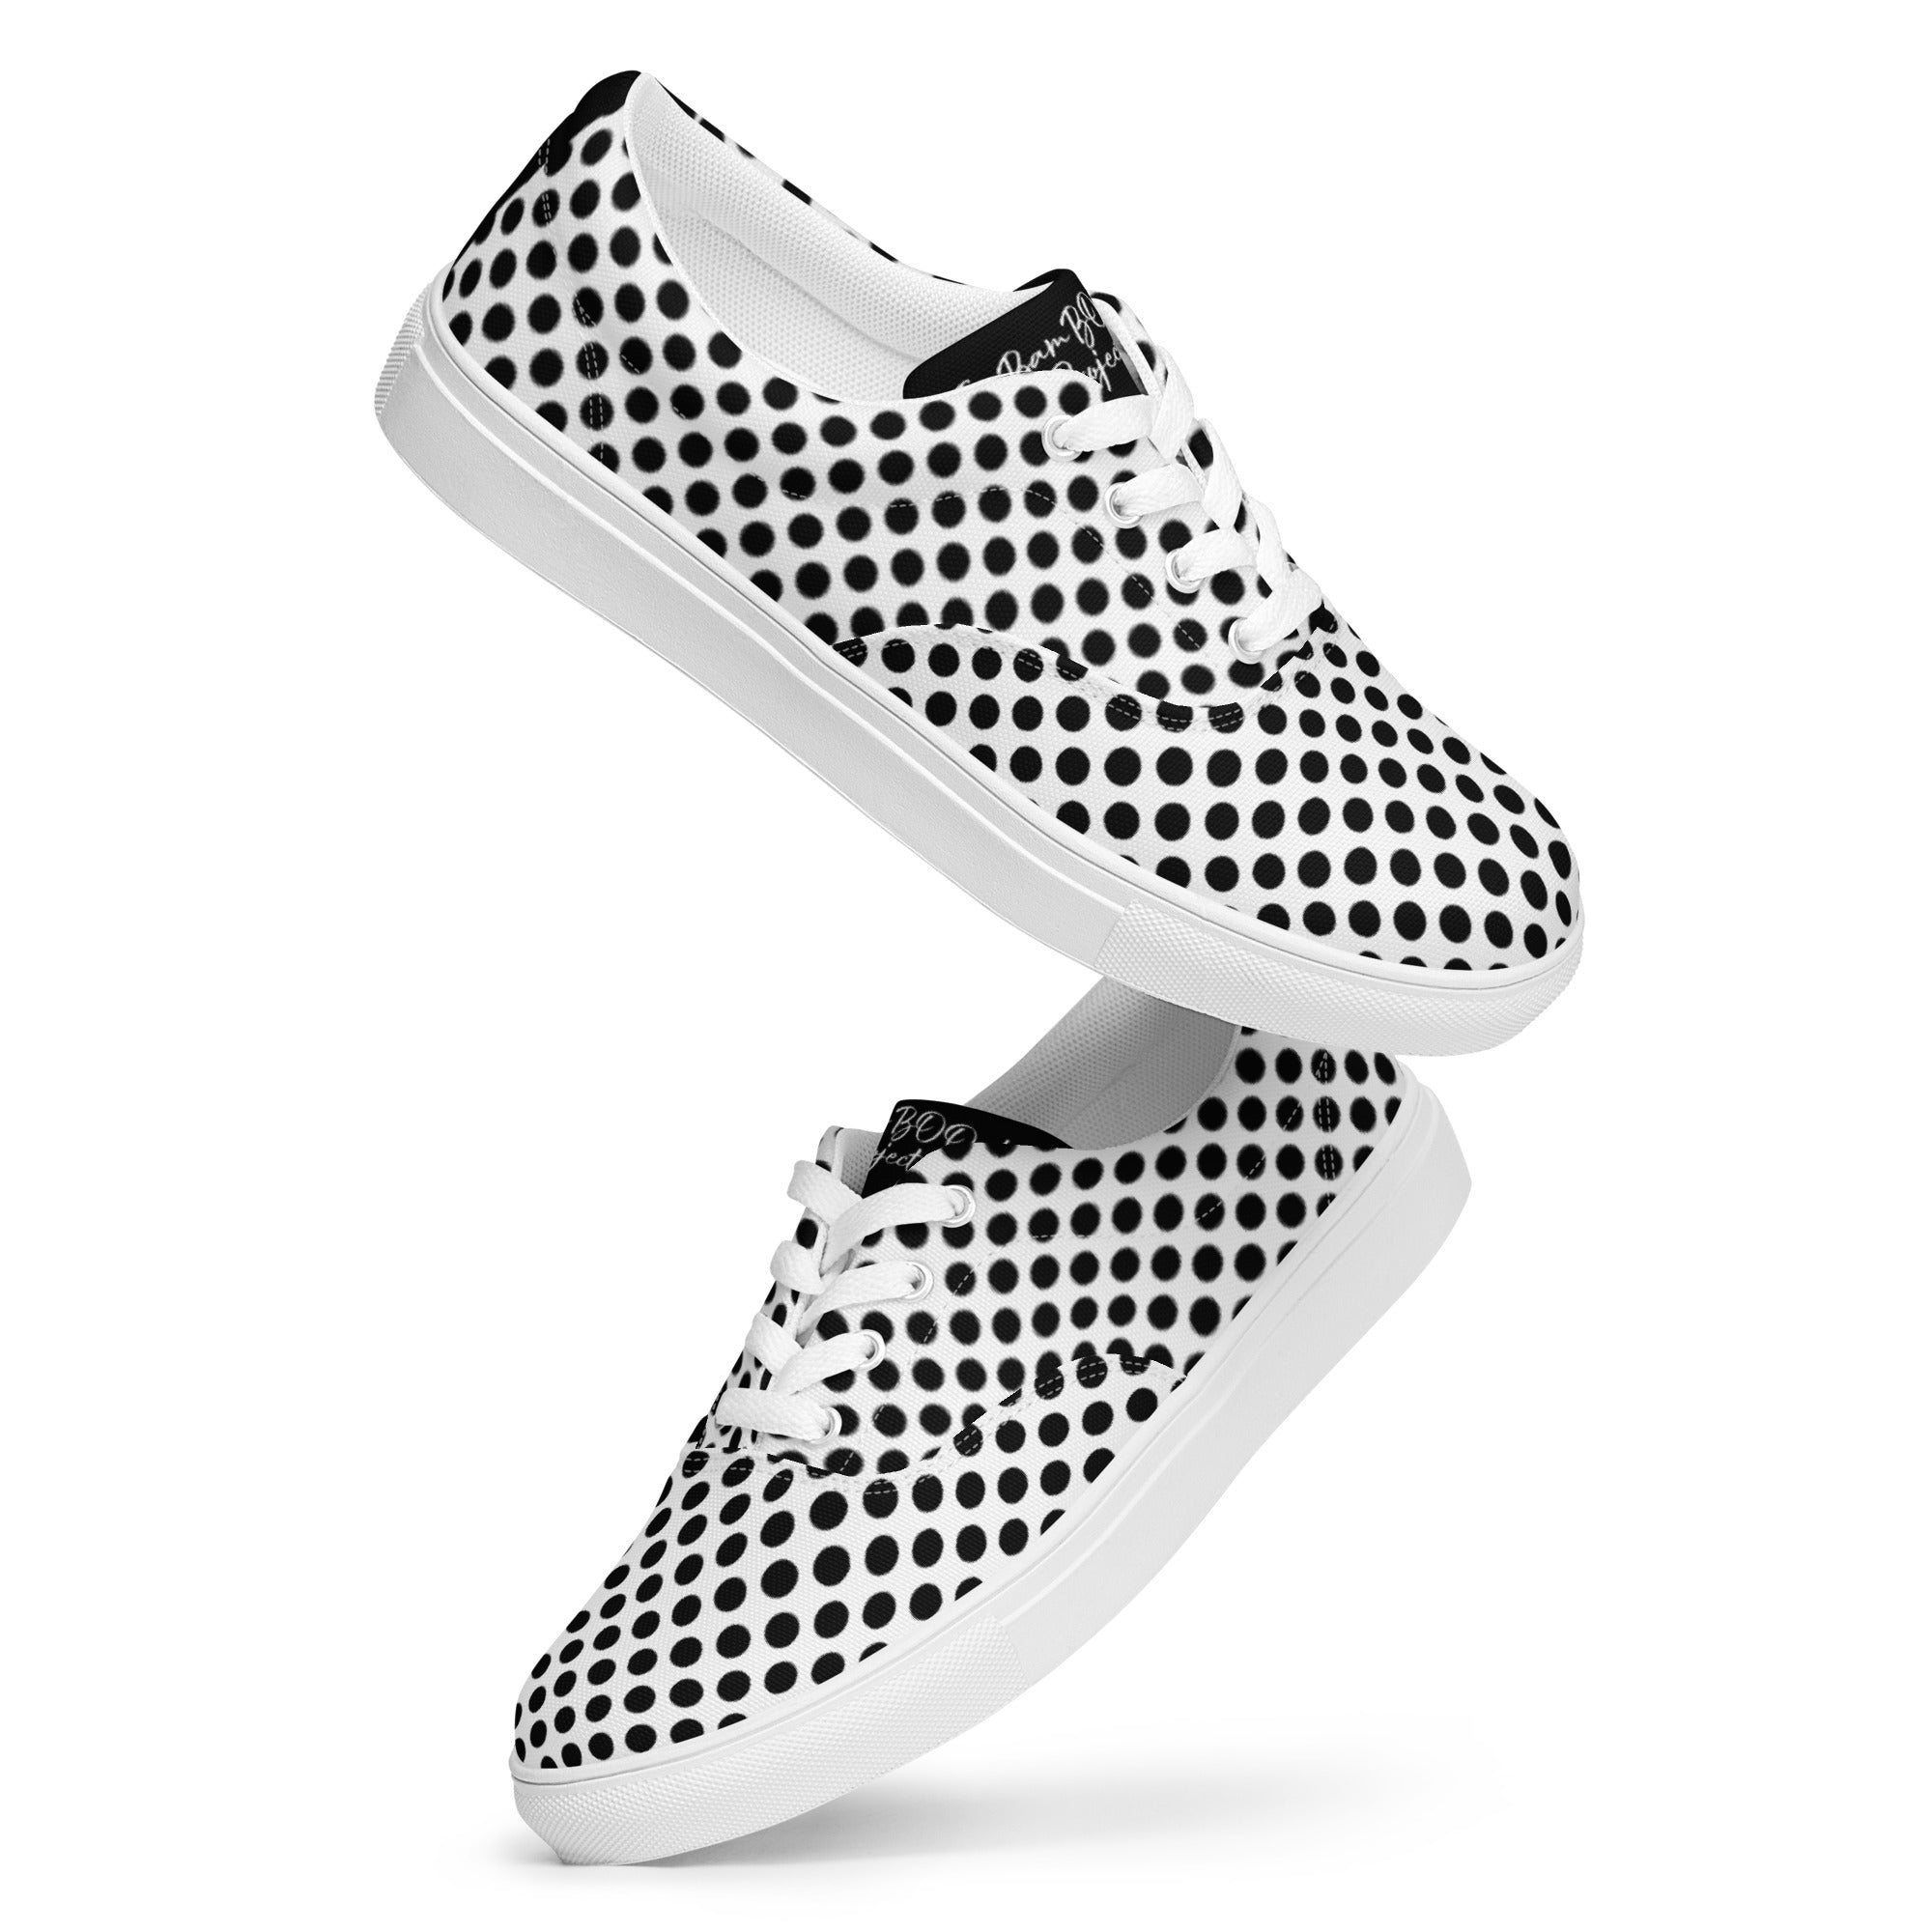 Polka Dot Women’s Lace-up Canvas Shoes